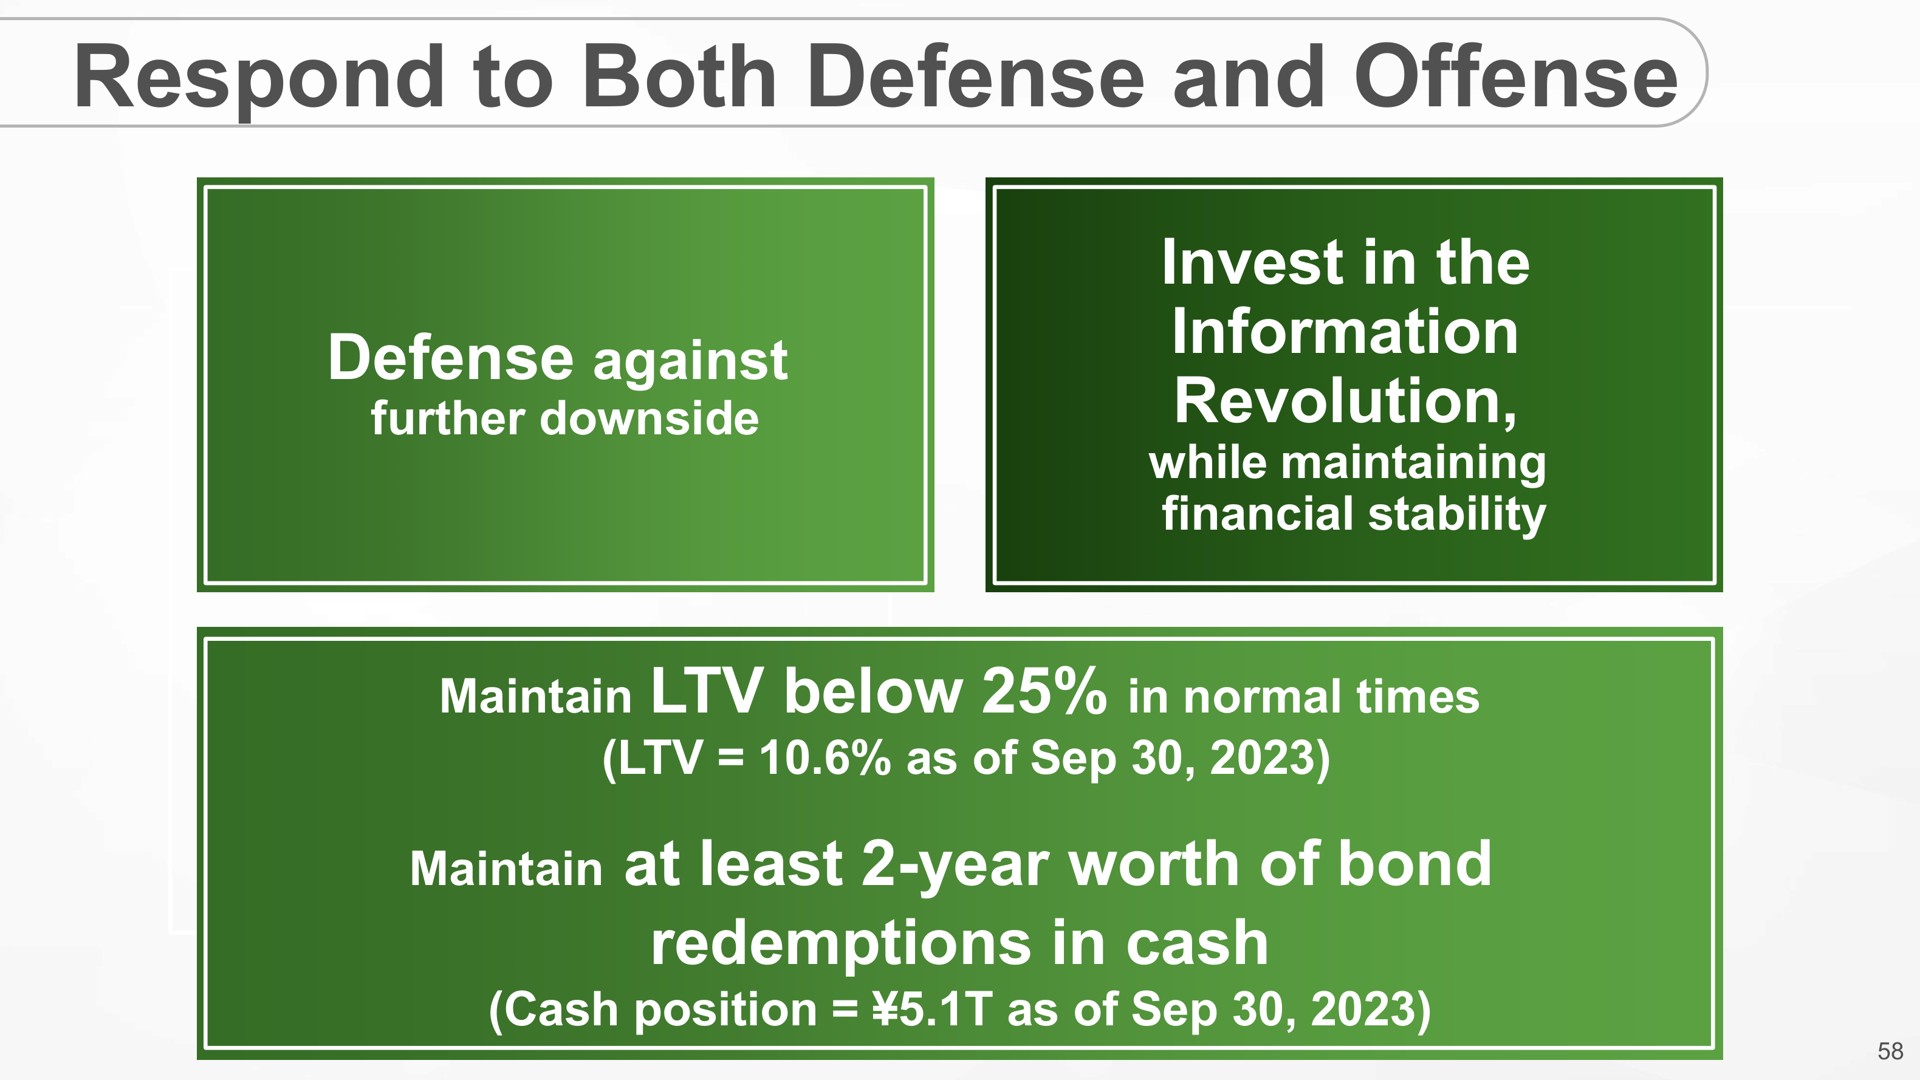 respond to both defense and offense invest in the information revolution maintain at least year worth of bond redemptions in cash against | SoftBank